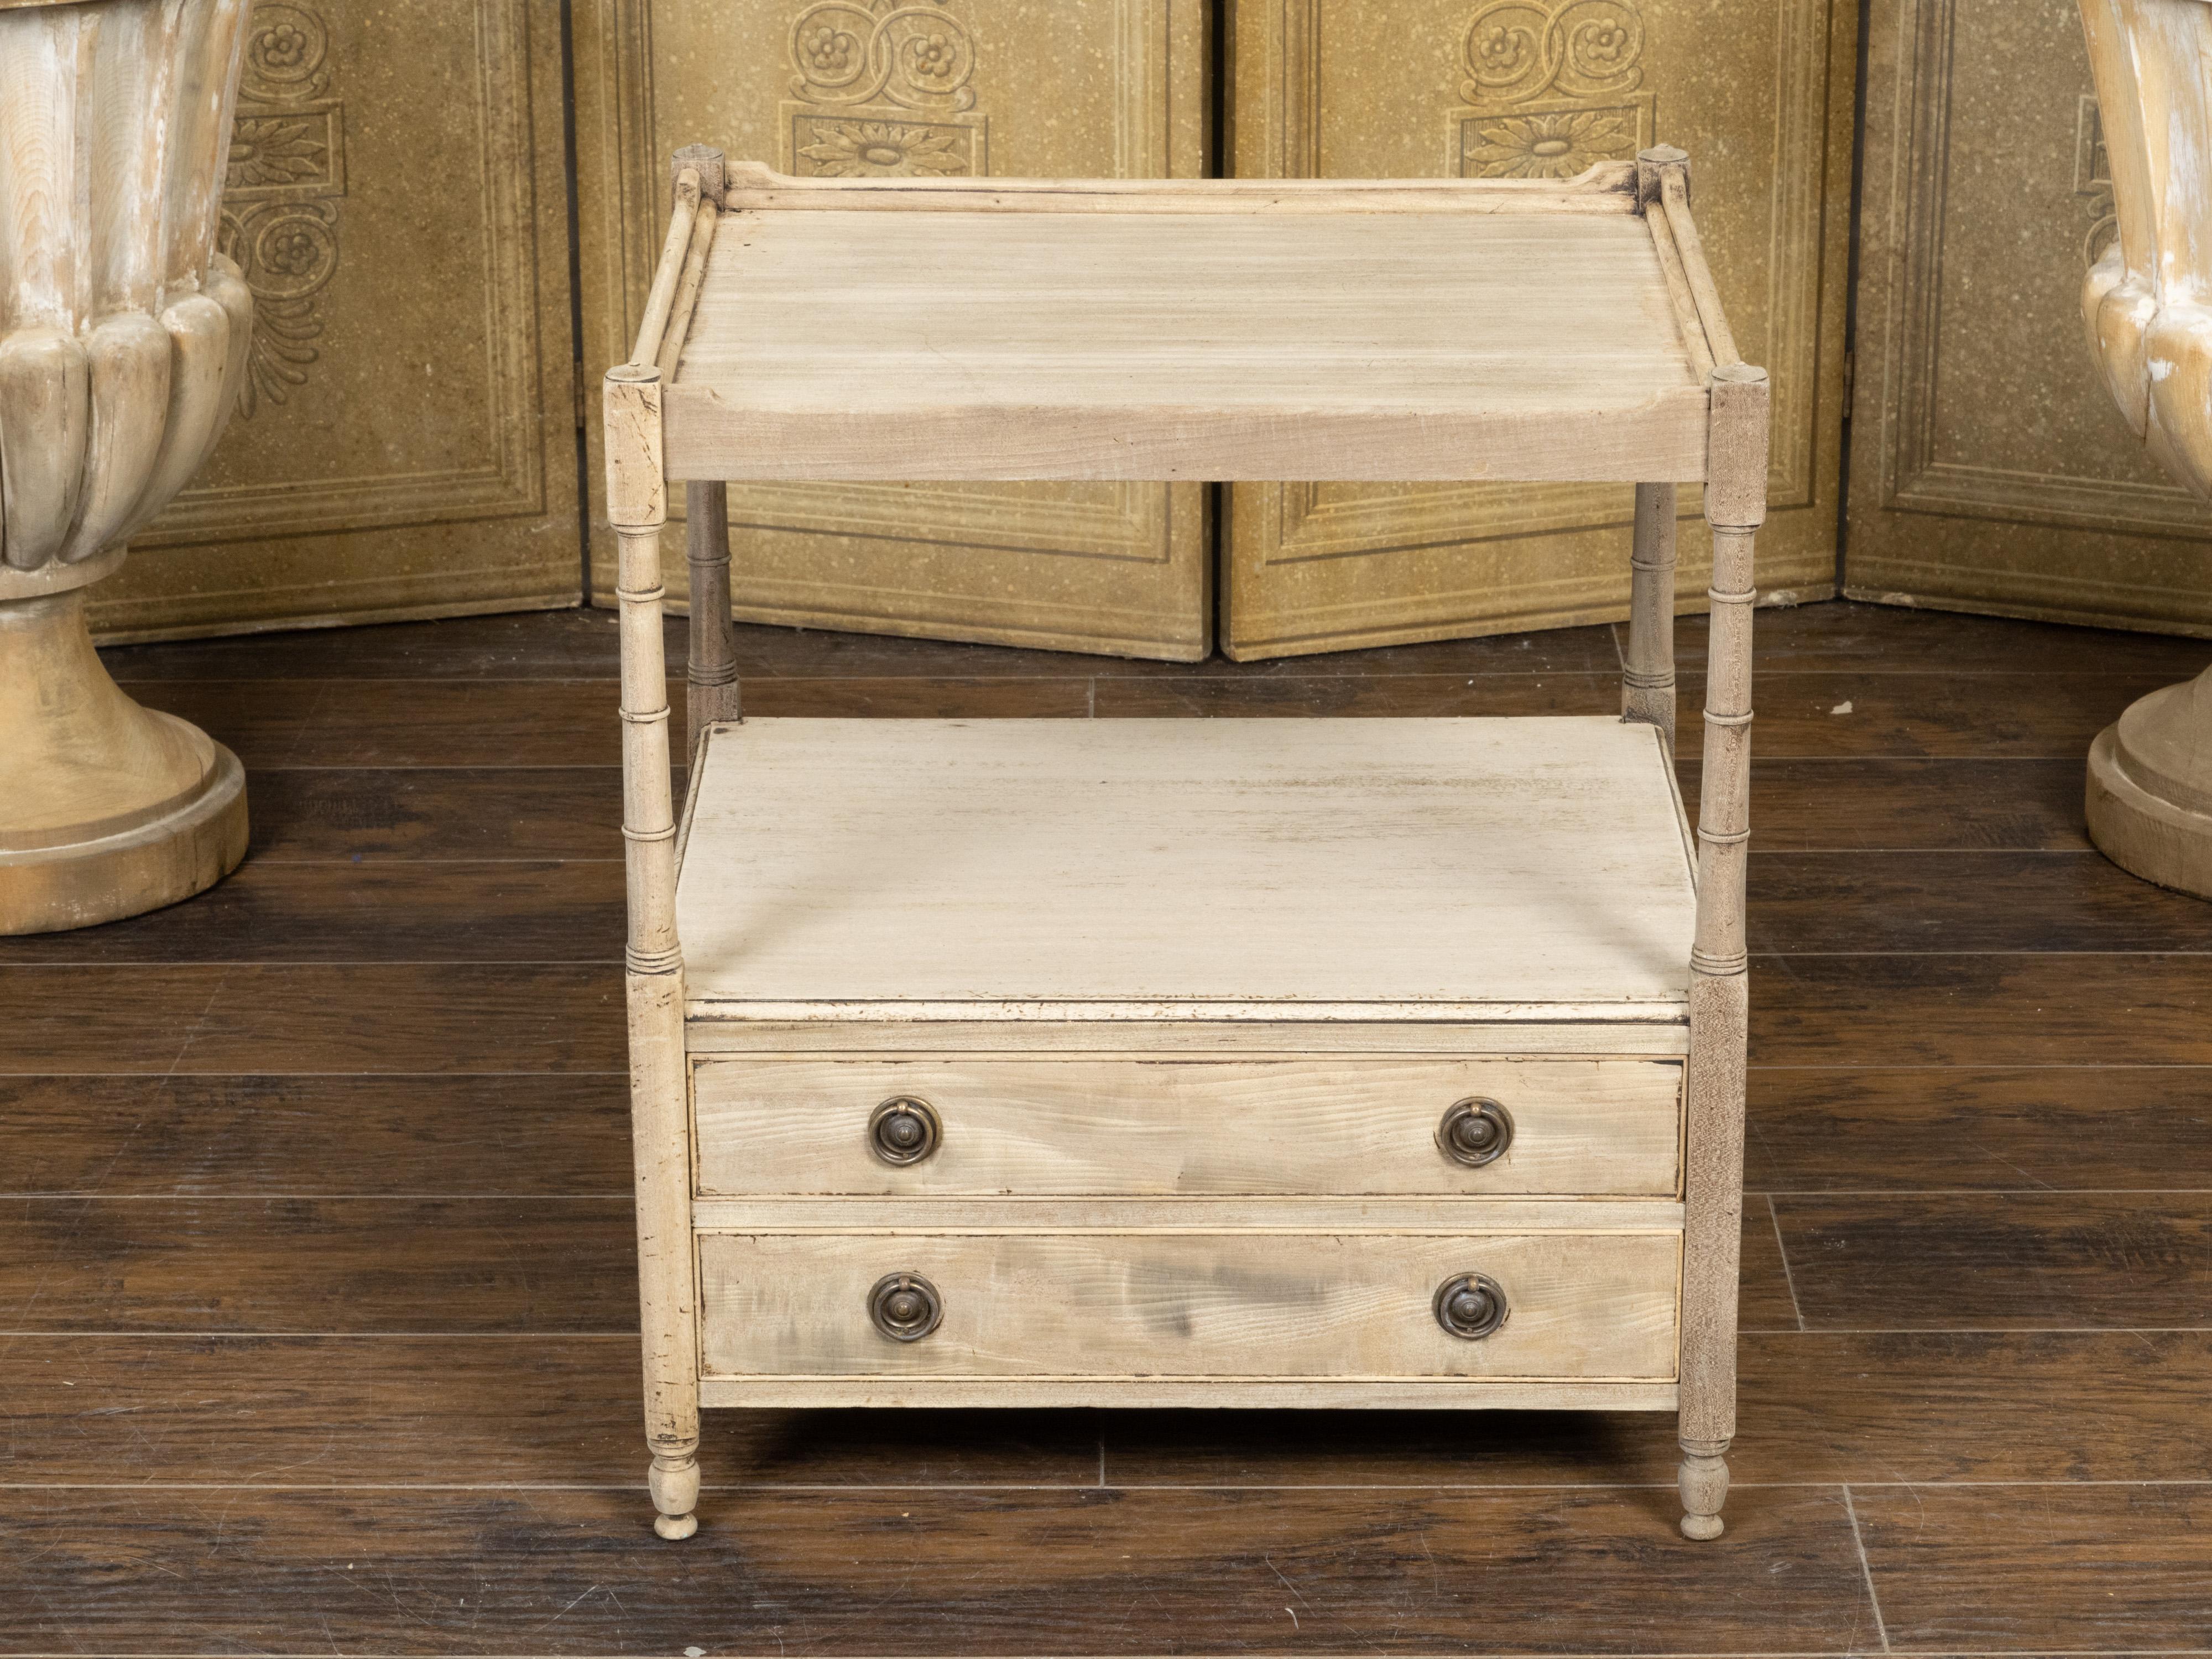 An English bleached mahogany end table from the 19th Century, with open shelf, two drawers and classical brass hardware. Created in England during the 19th Century, this mahogany end table features a bleached finish complimenting its clean lines